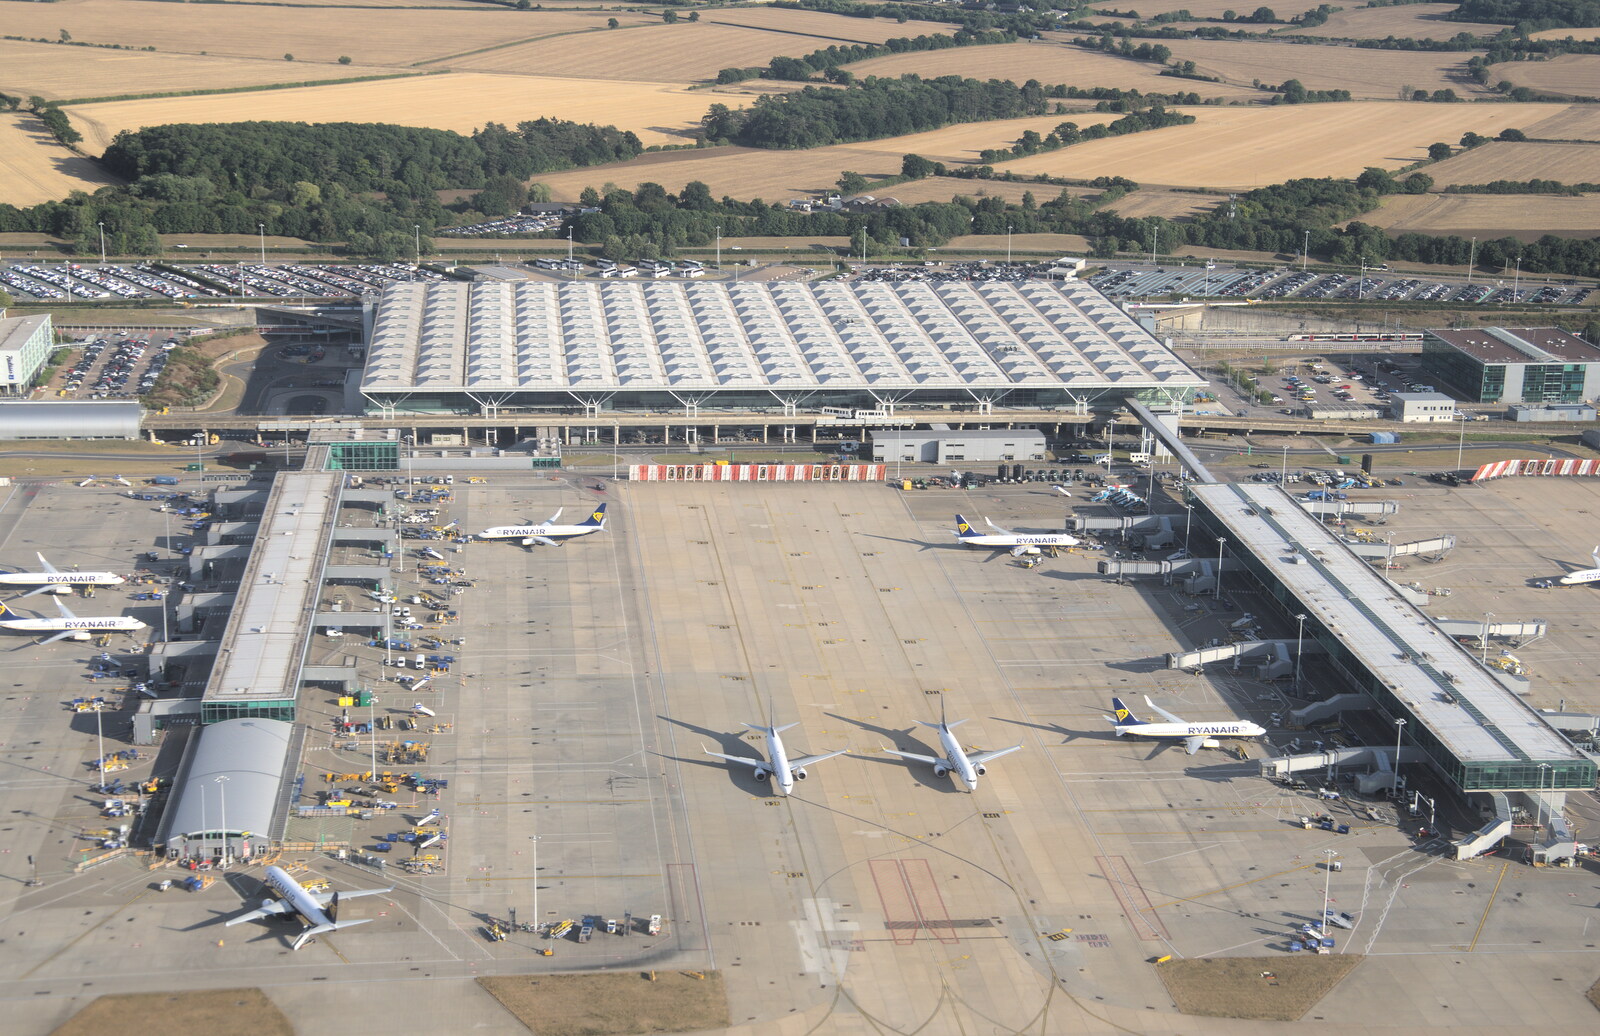 The Flags of Arezzo, Tuscany, Italy - 28th August 2022: The Norman Foster terminal from the air